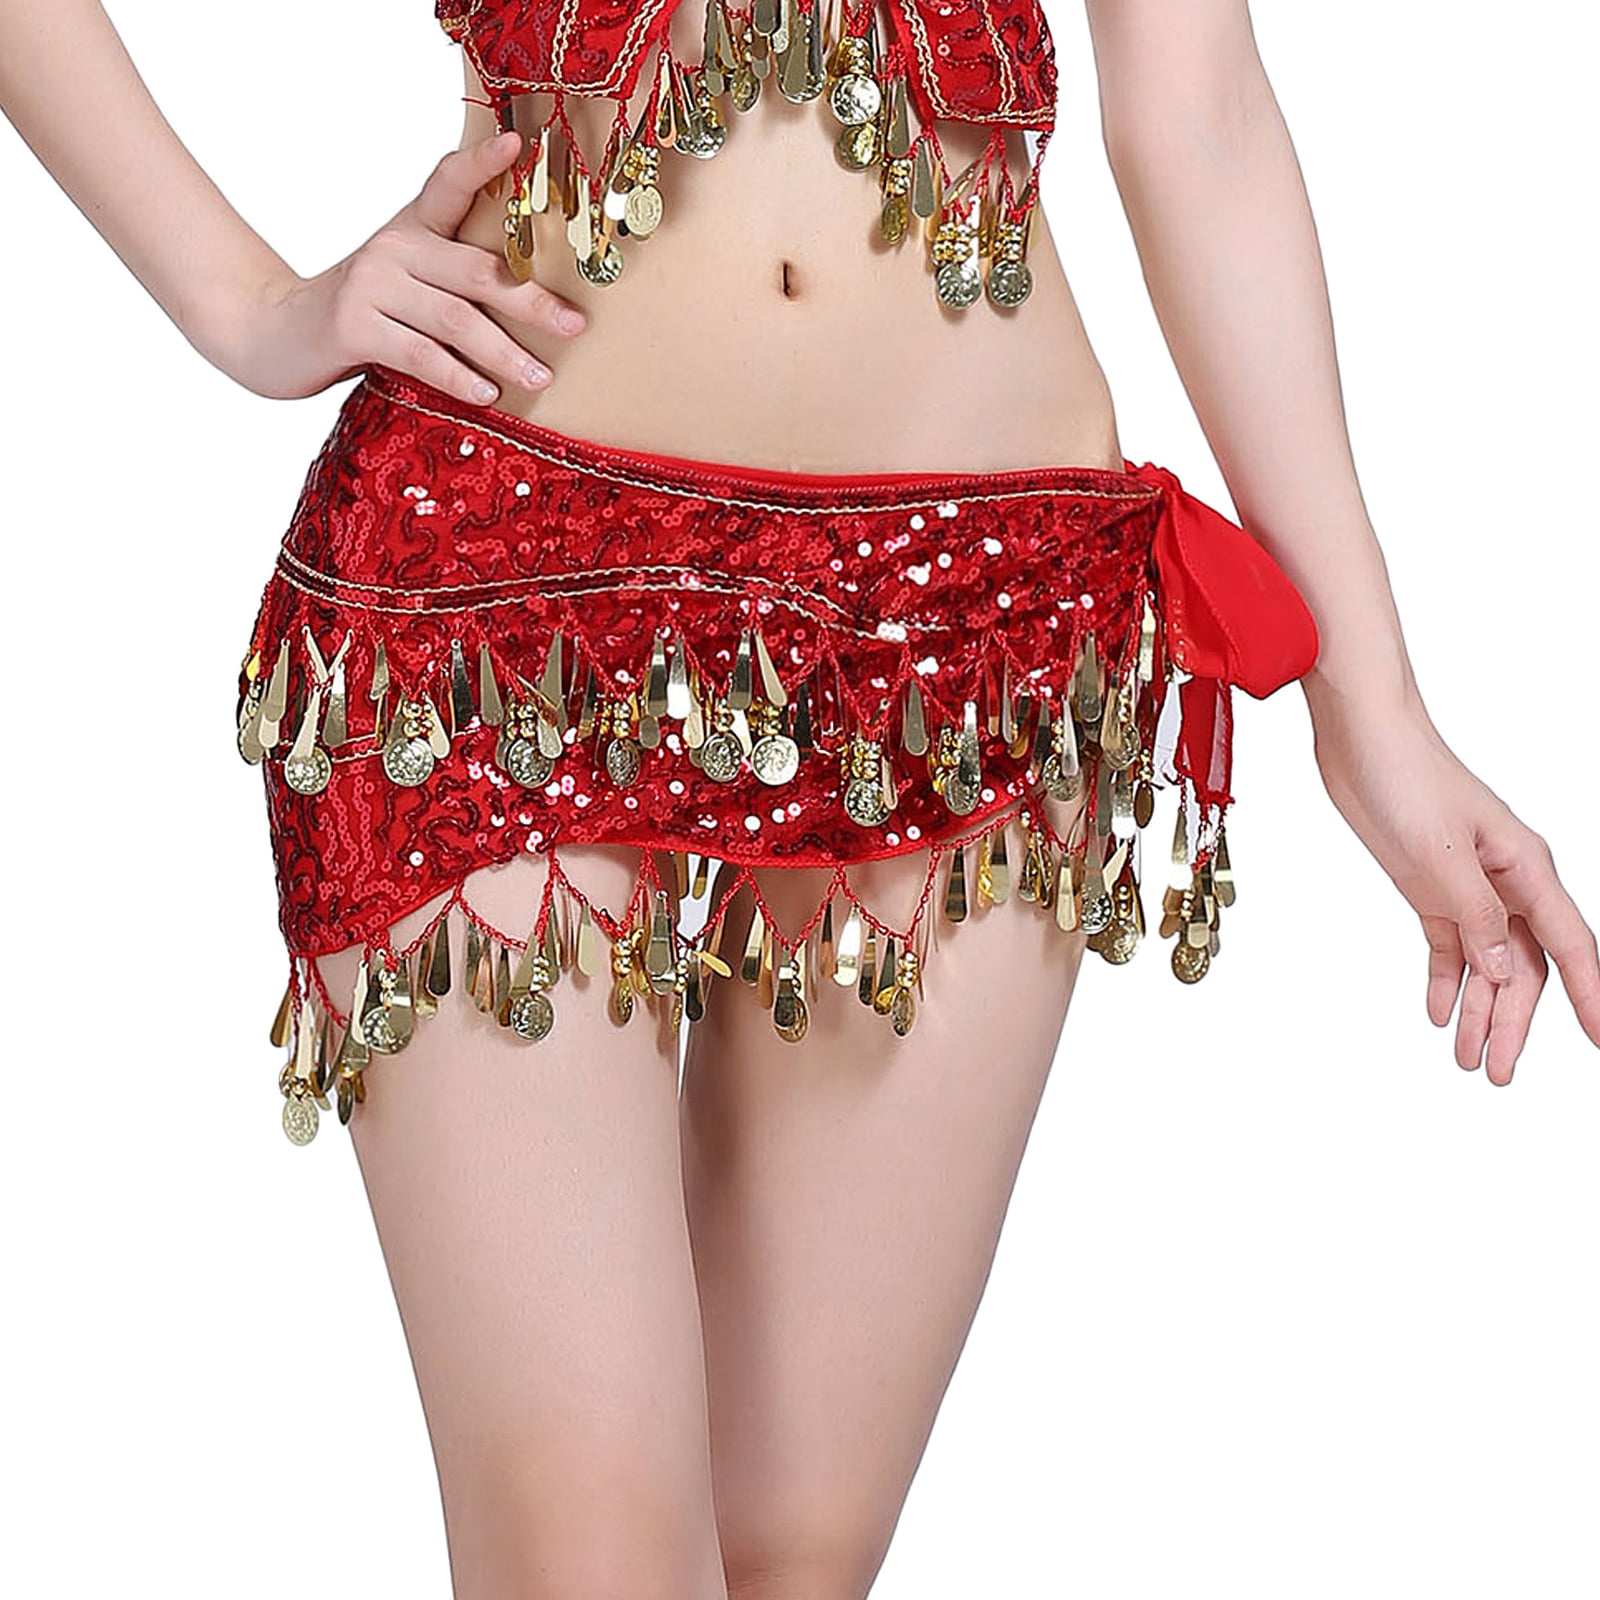 7 Pieces Belly Dance Hip Scarf for Women Chiffon Dangling Belly Dance Hip Skirt Scarf Wrap Belt with Gold Coins 